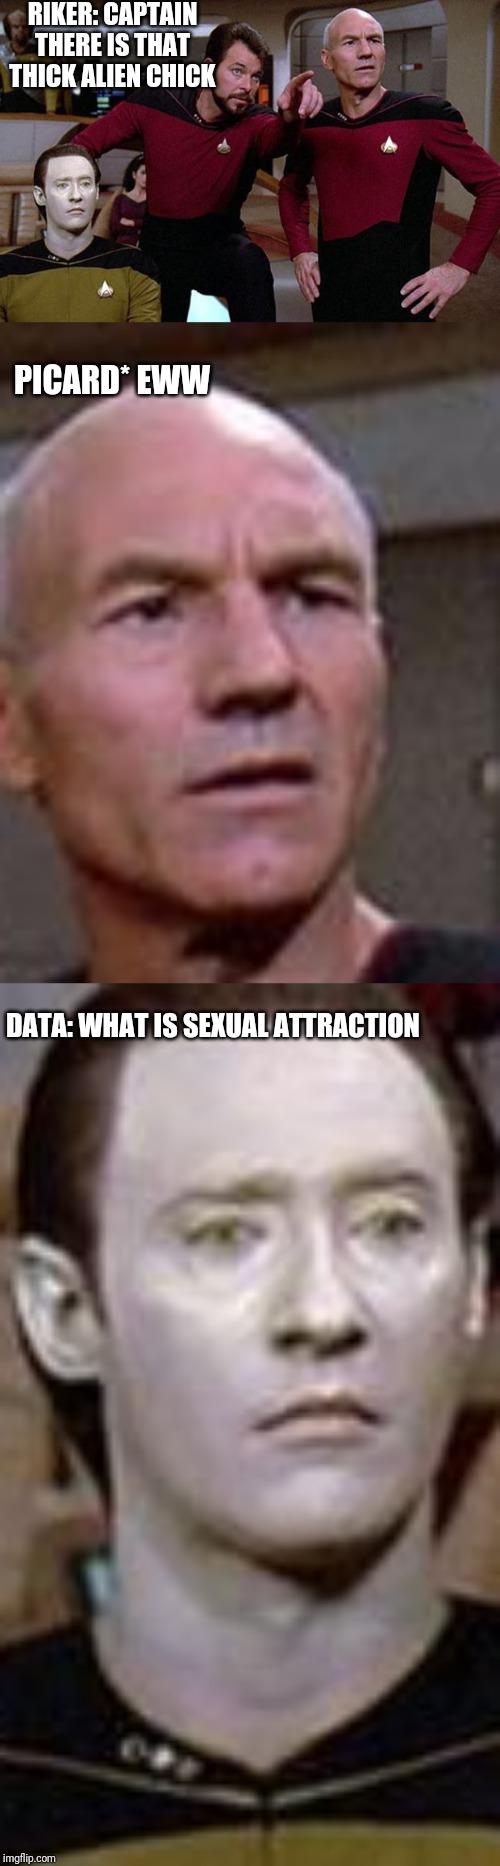 RIKER: CAPTAIN THERE IS THAT THICK ALIEN CHICK; PICARD* EWW; DATA: WHAT IS SEXUAL ATTRACTION | image tagged in pointy riker | made w/ Imgflip meme maker